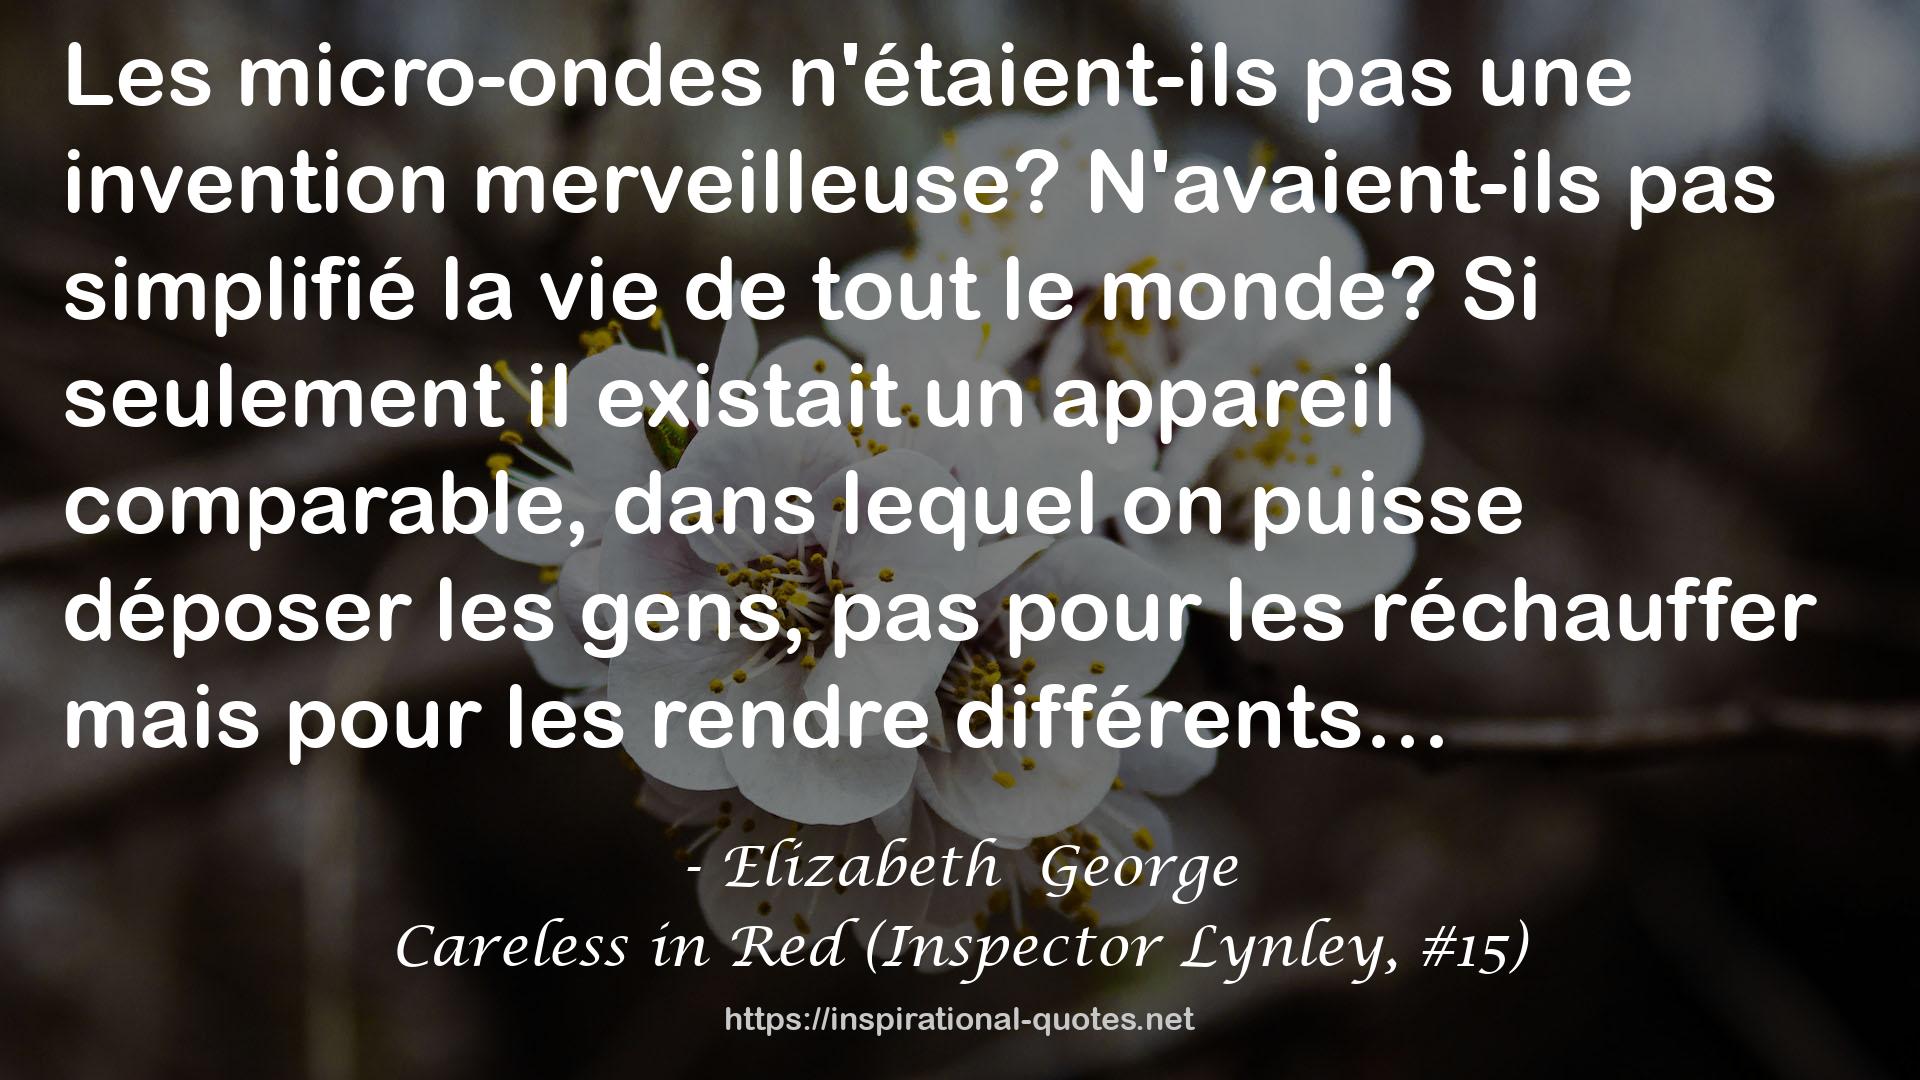 Careless in Red (Inspector Lynley, #15) QUOTES